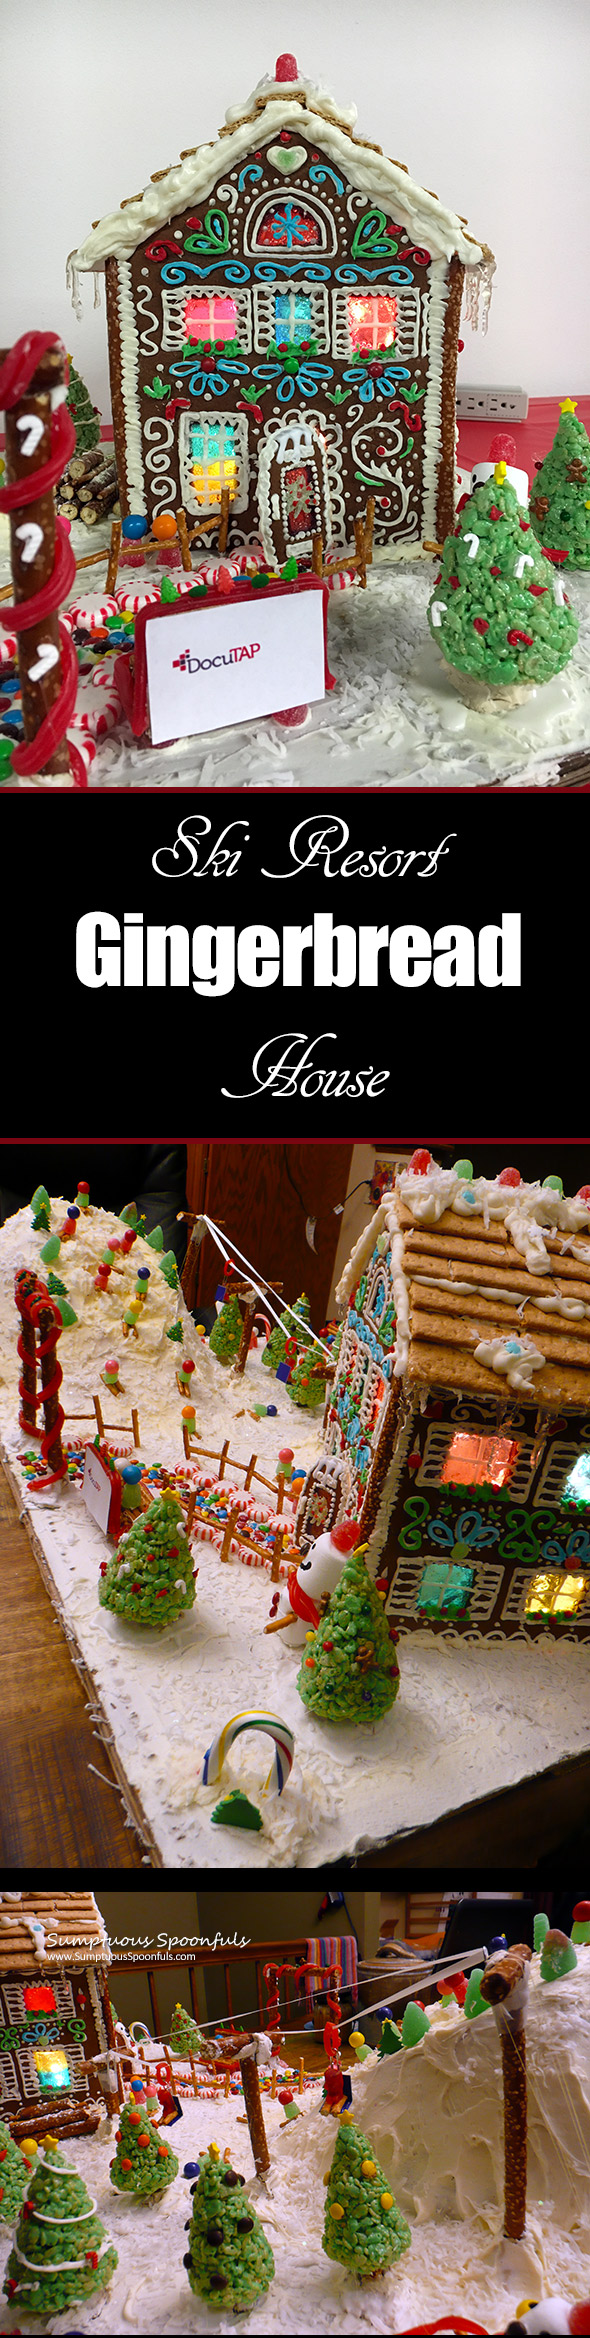 Ski Resort Gingerbread House ~ Sumptuous Spoonfuls gingerbread house journey